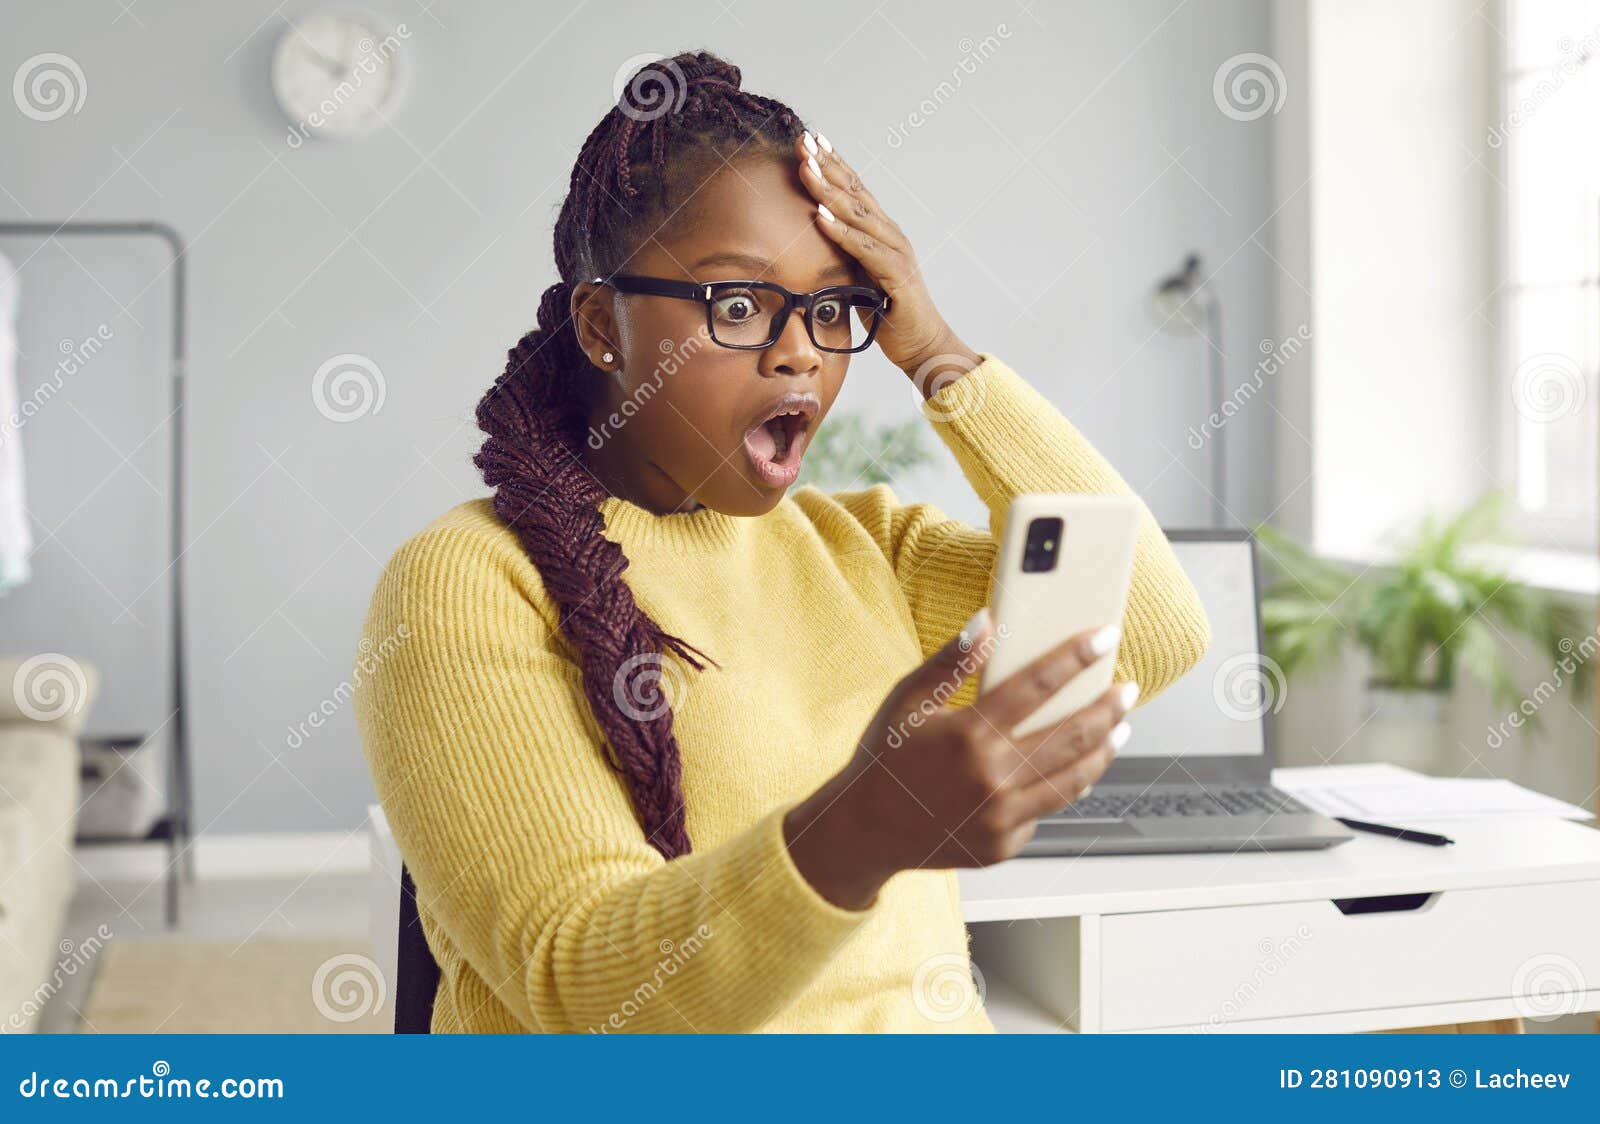 beautiful africanamerican woman looks at the phone in horror.